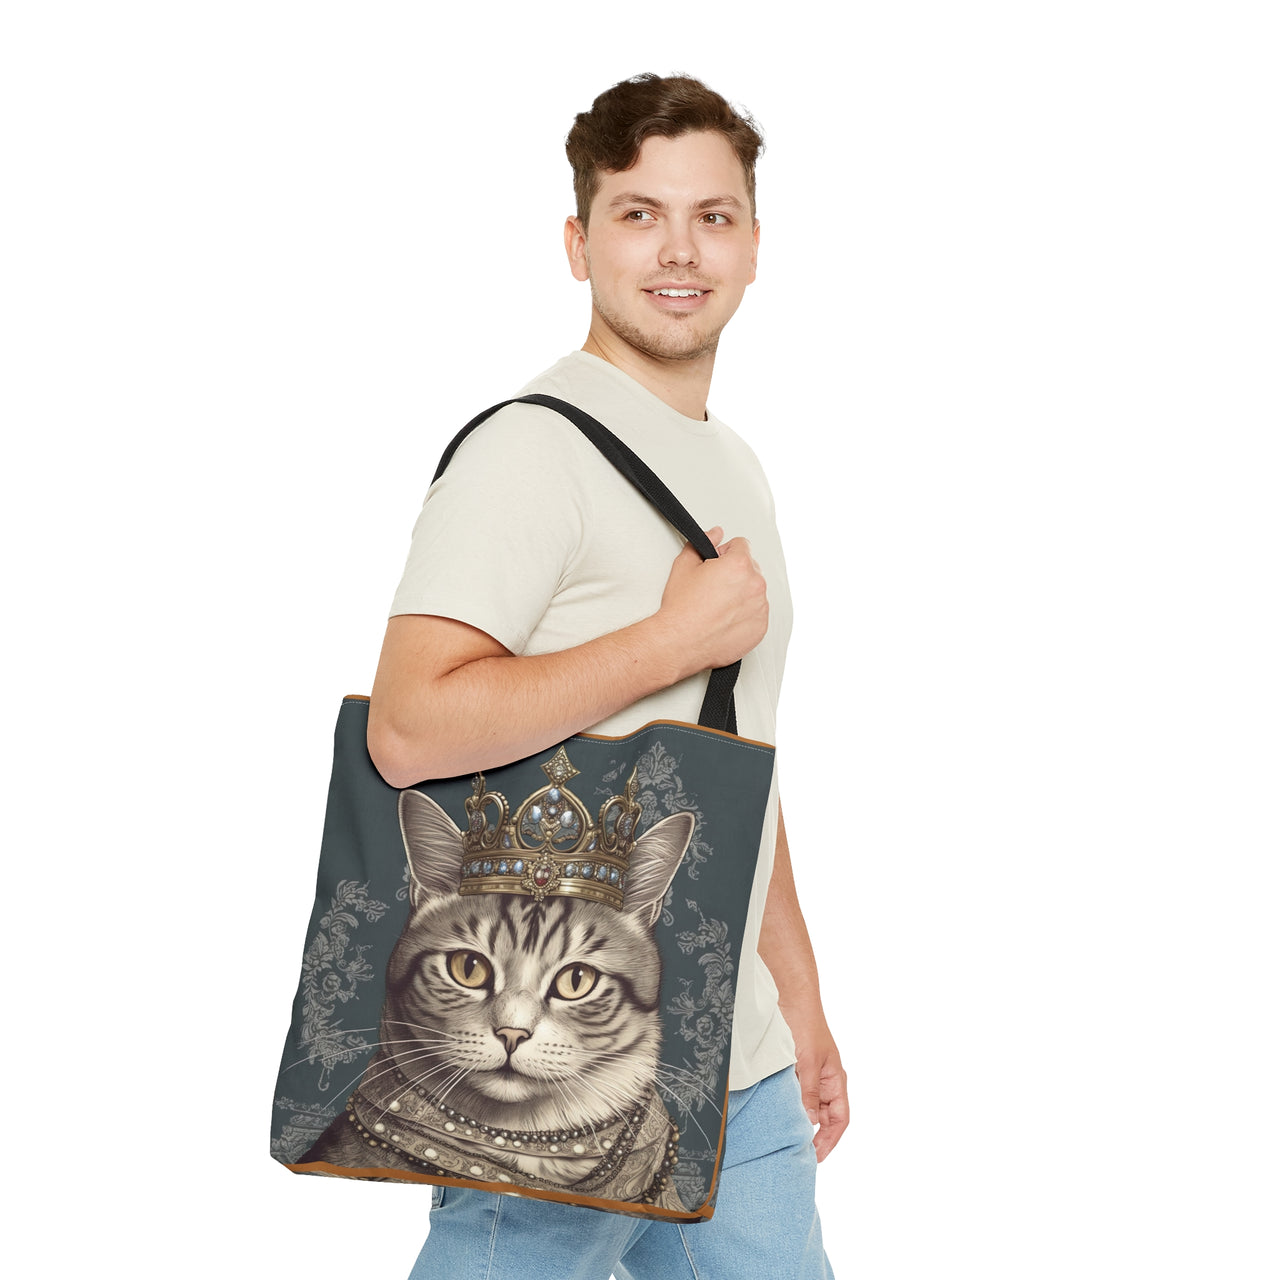 Princess Cat in Vintage 1920s Style One Tote Bag